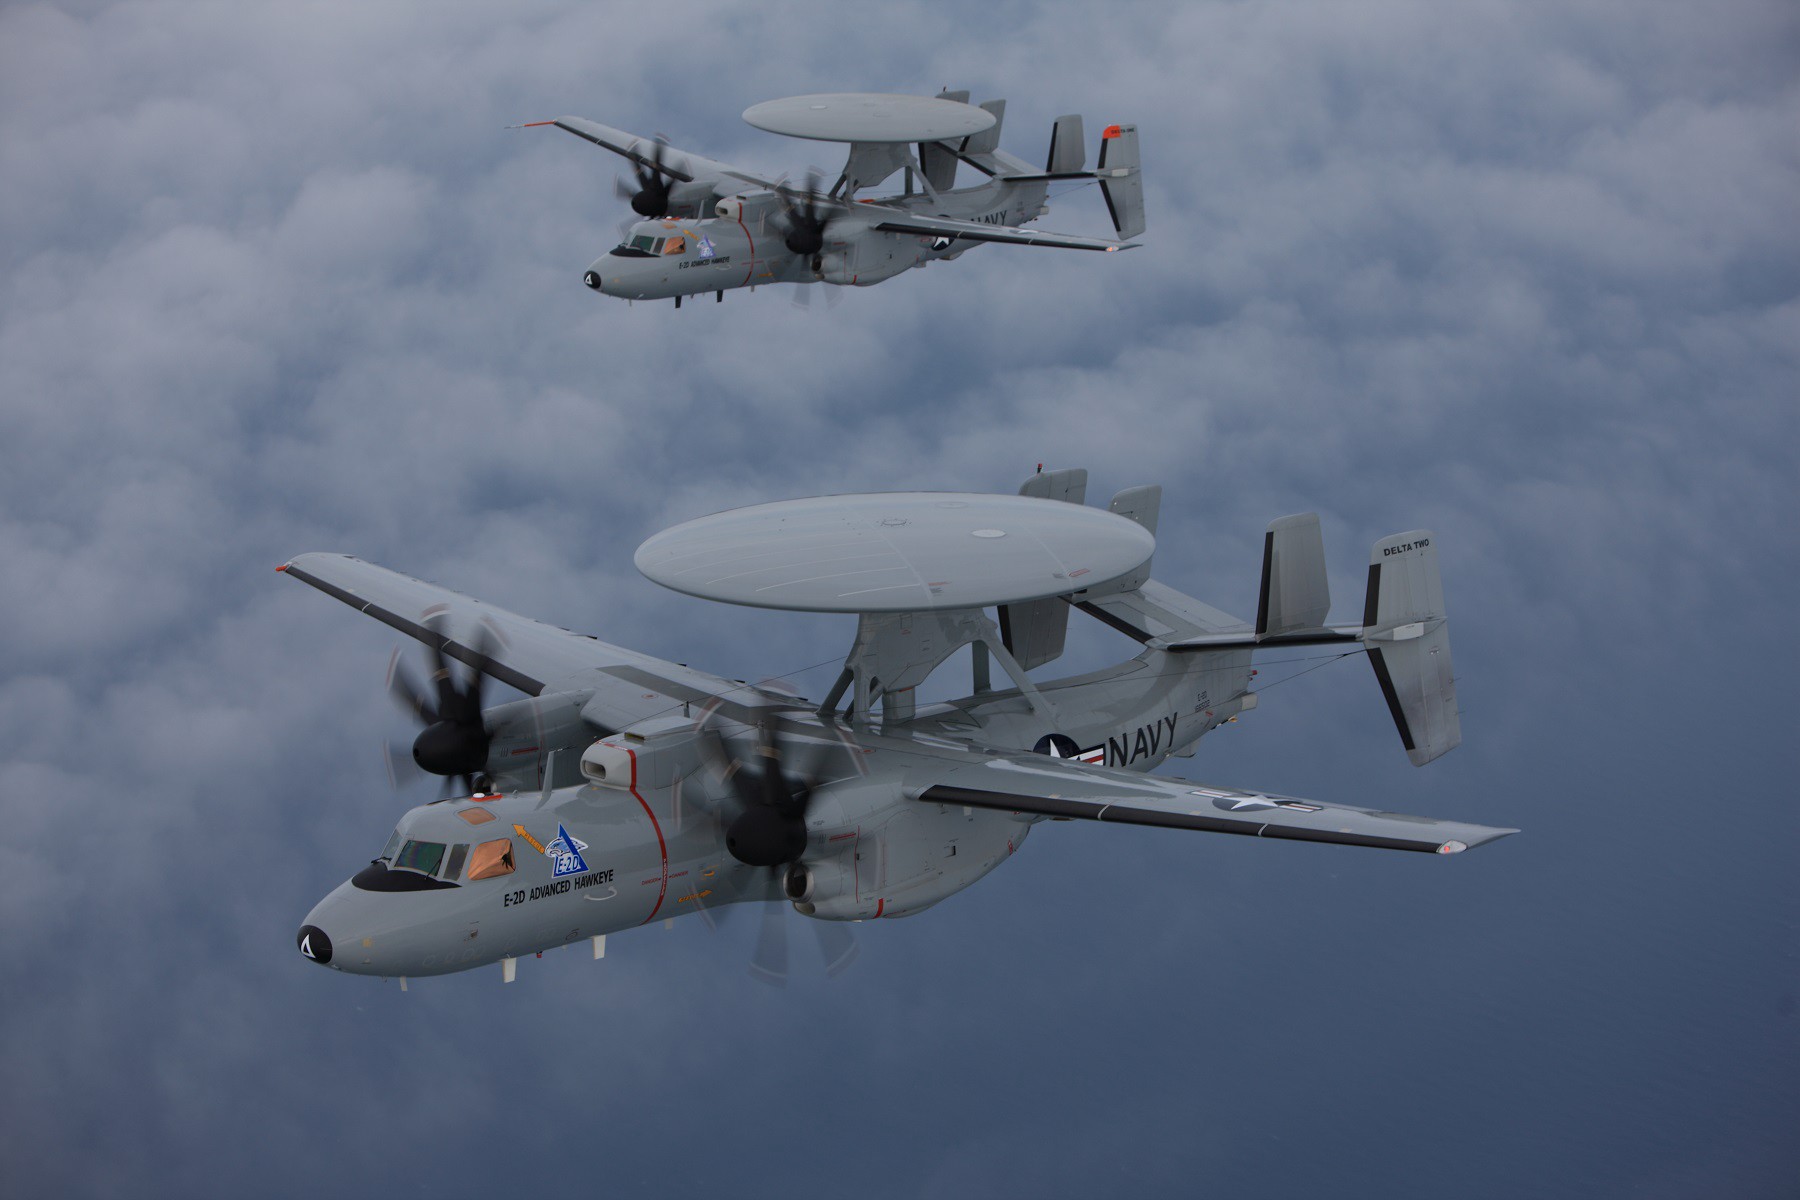 The U.S. Navy's Next Hawkeye Plane Can Detect Stealth Fighters